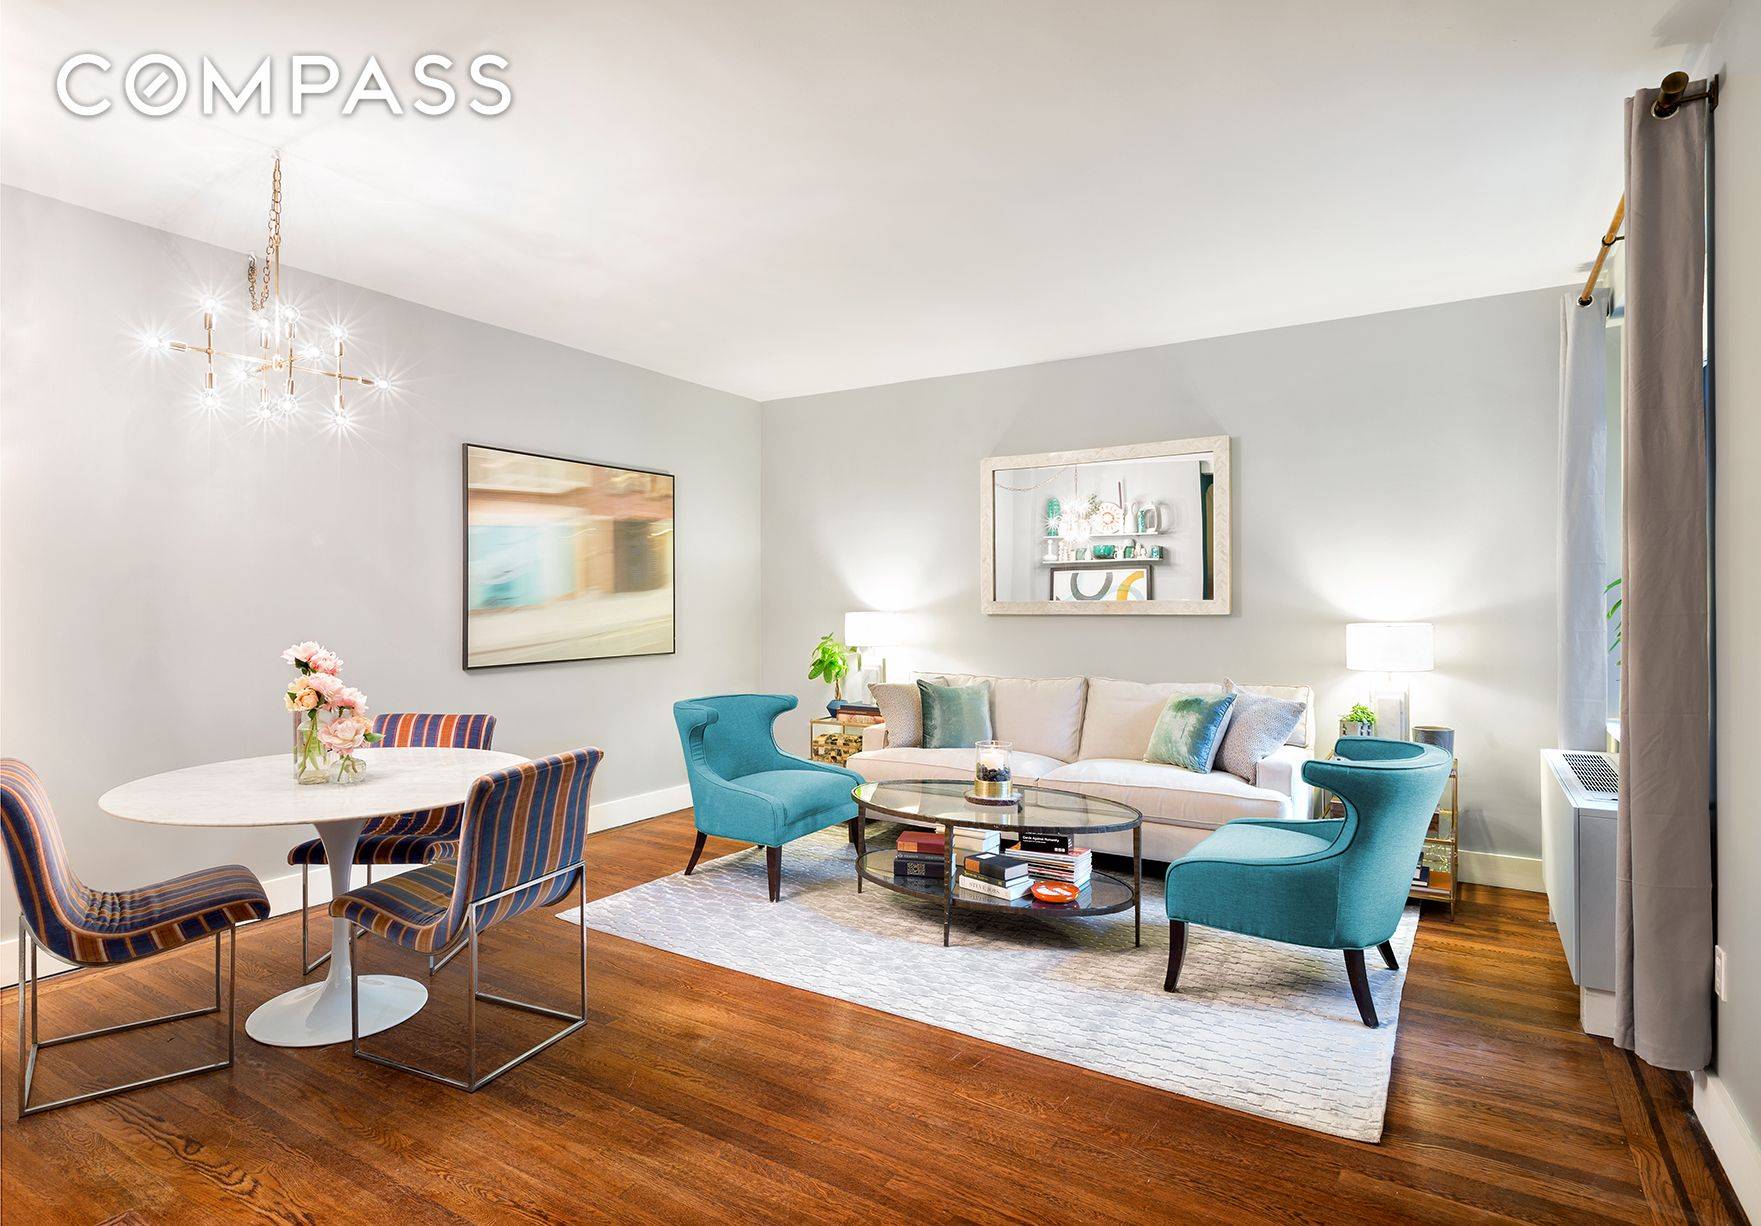 Chelsea Luxury Stunning, Gut Renovated 1BD 2BA in the heart of Chelsea, Elevator Building, S S appliances, W D in unit, D W, 24hr Doorman, Landscaped Roof Deck, Elevator Building, ...